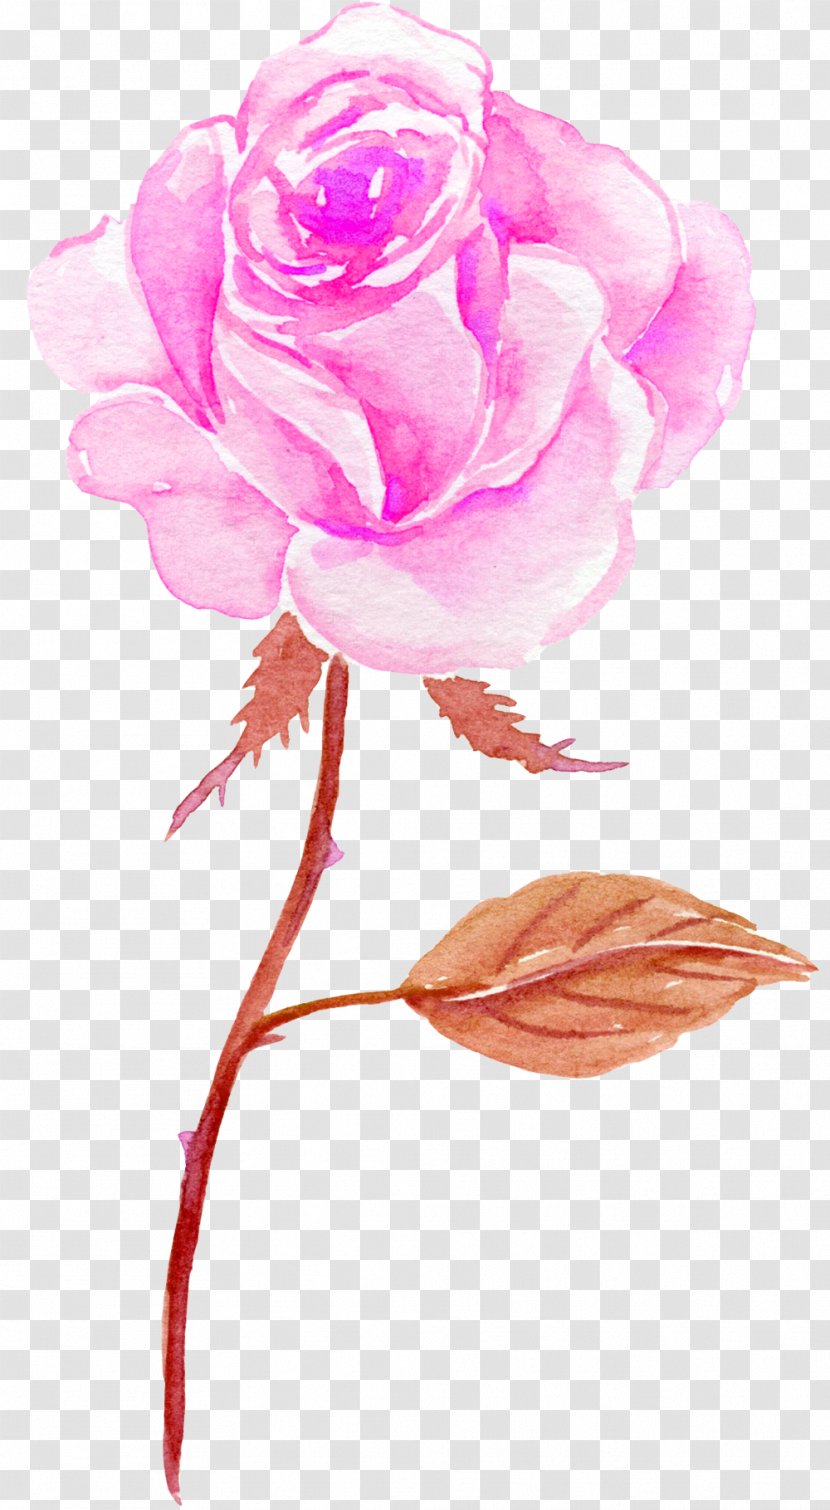 Flower Watercolor Painting - Flowers Transparent PNG